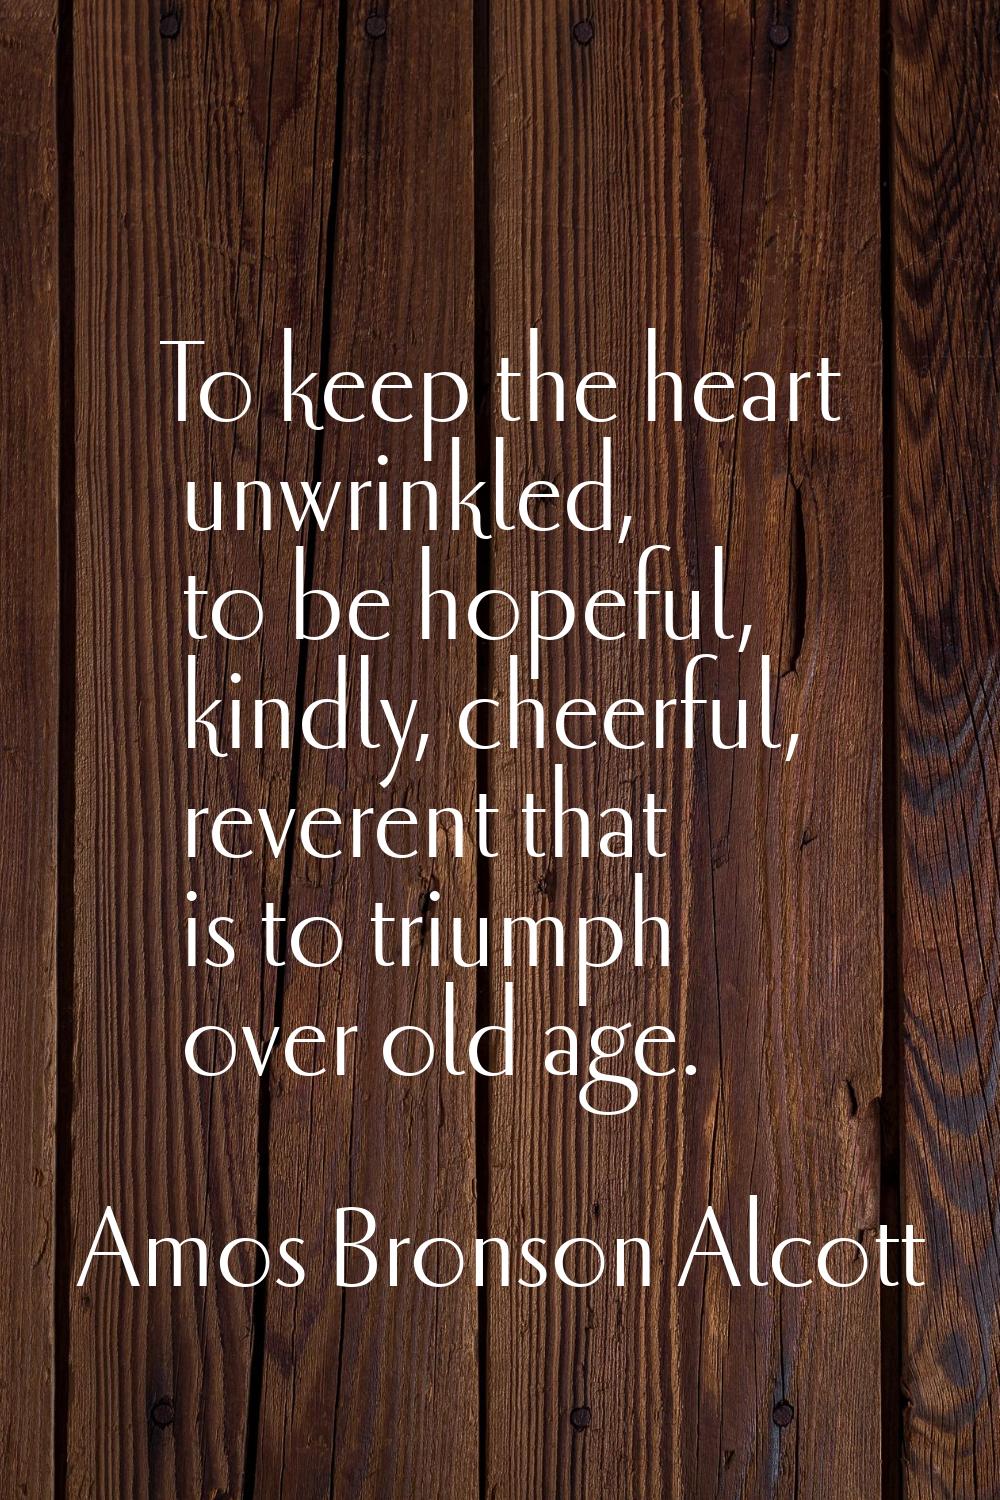 To keep the heart unwrinkled, to be hopeful, kindly, cheerful, reverent that is to triumph over old